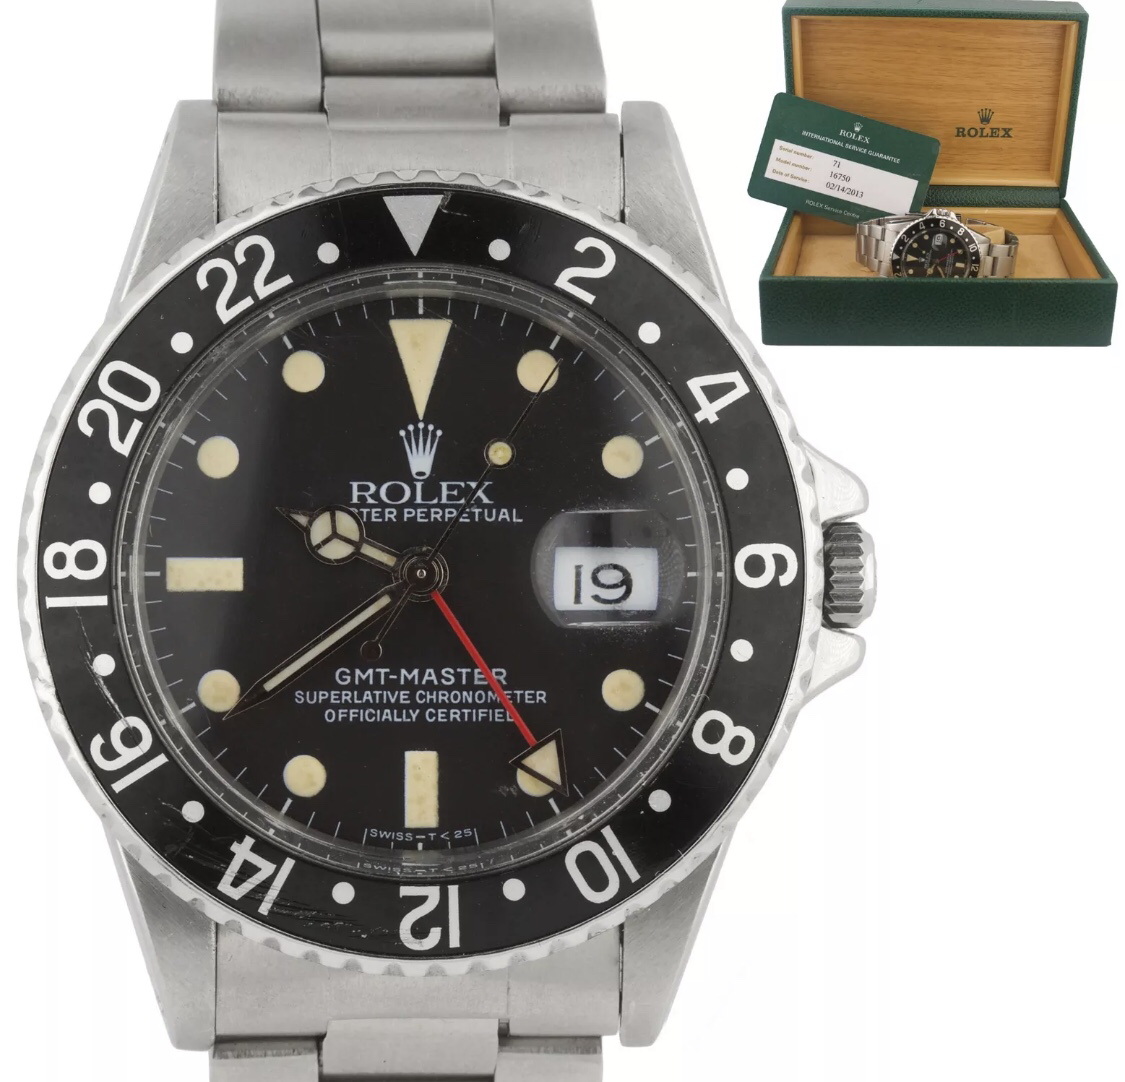 Rolex 16710 GMT Matte Dial- Buying all Rolex, Breitling, Cartier, IWC, Panerai Watches Collectors Coins & Jewelry Lynbrook (516)341-7355